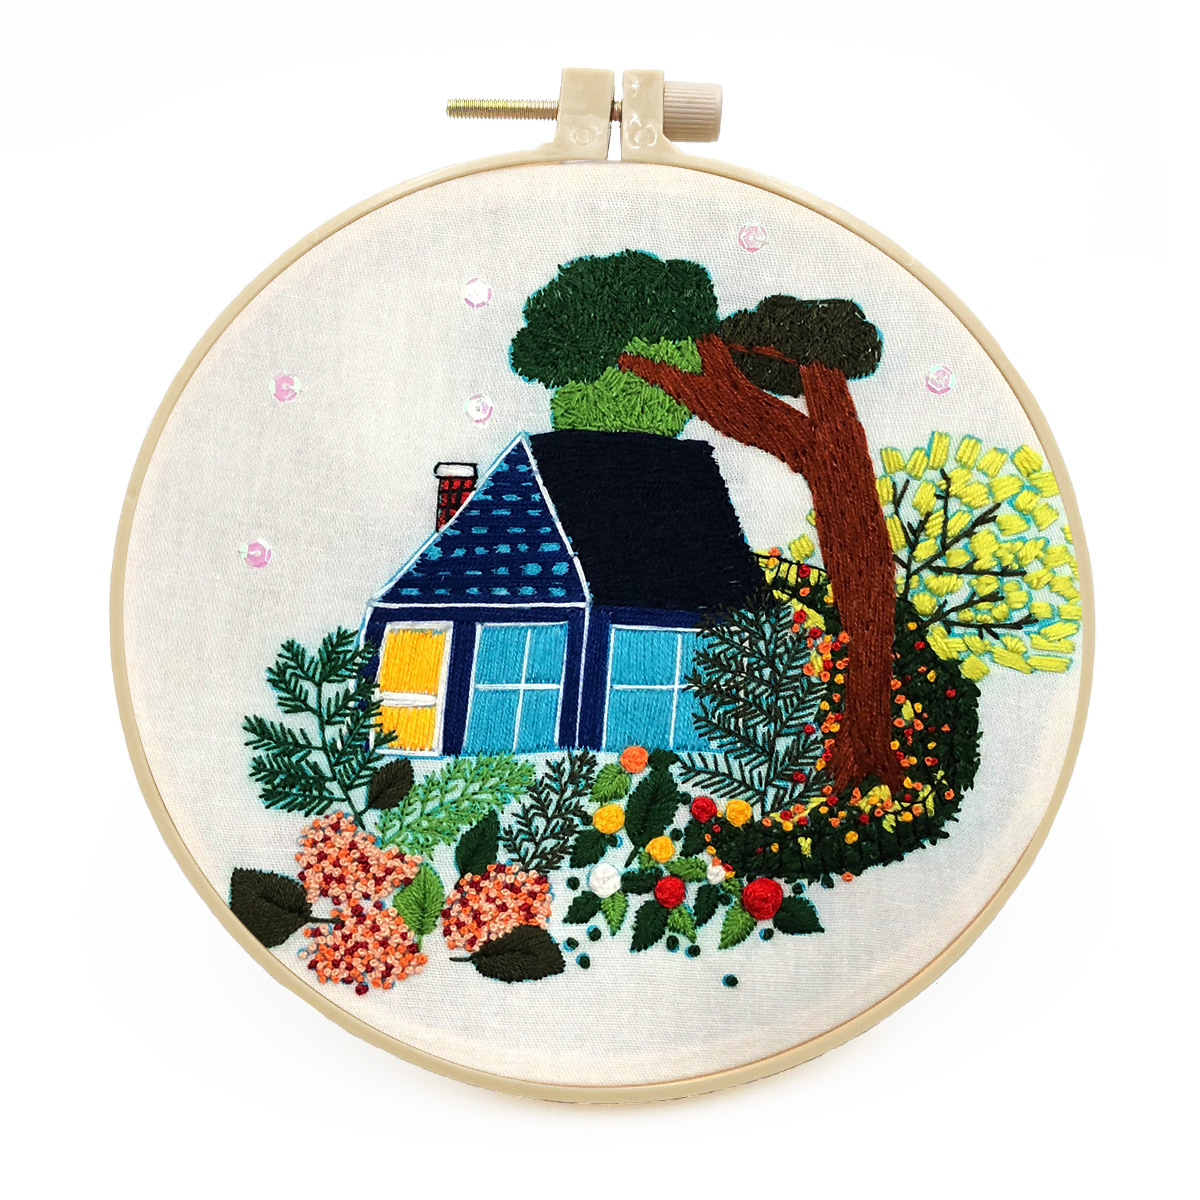 DIY Handmade Embroidery Cross stitch kit - Country Cottage Pattern